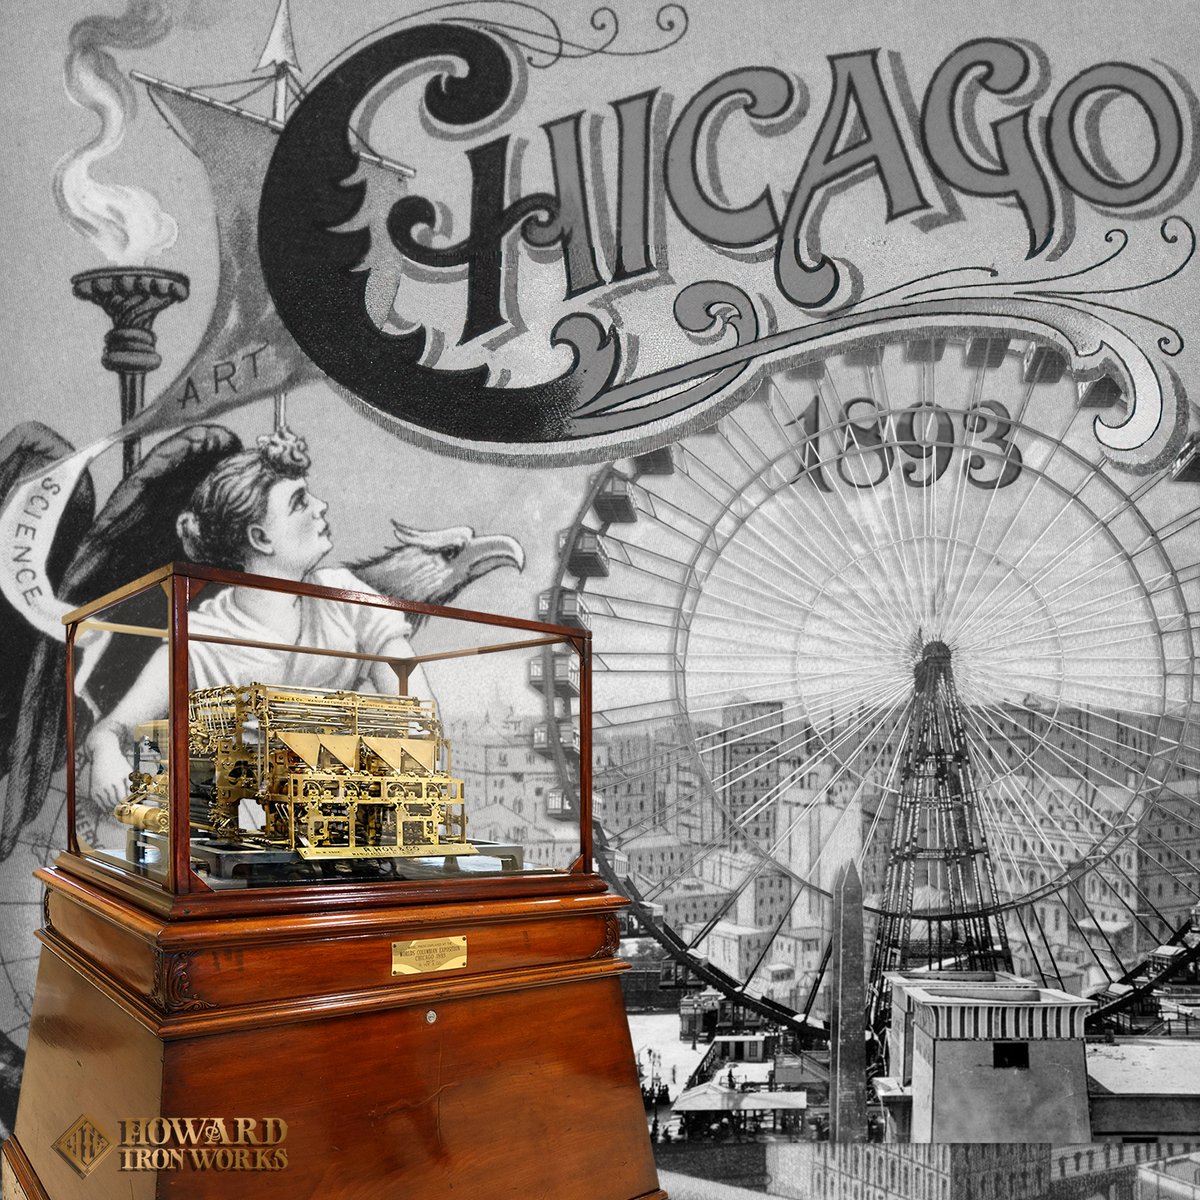 131 yrs #OTD – on May 1, 1893, Pres. Cleveland opened the Chicago World’s Columbian Expo. We're proud to hold in our collection one of the legacies from the Fair, an exquisite model by R. Hoe & Co. of the Sextuple web press. Read: tinyurl.com/3j8d2ubh #printinghistory